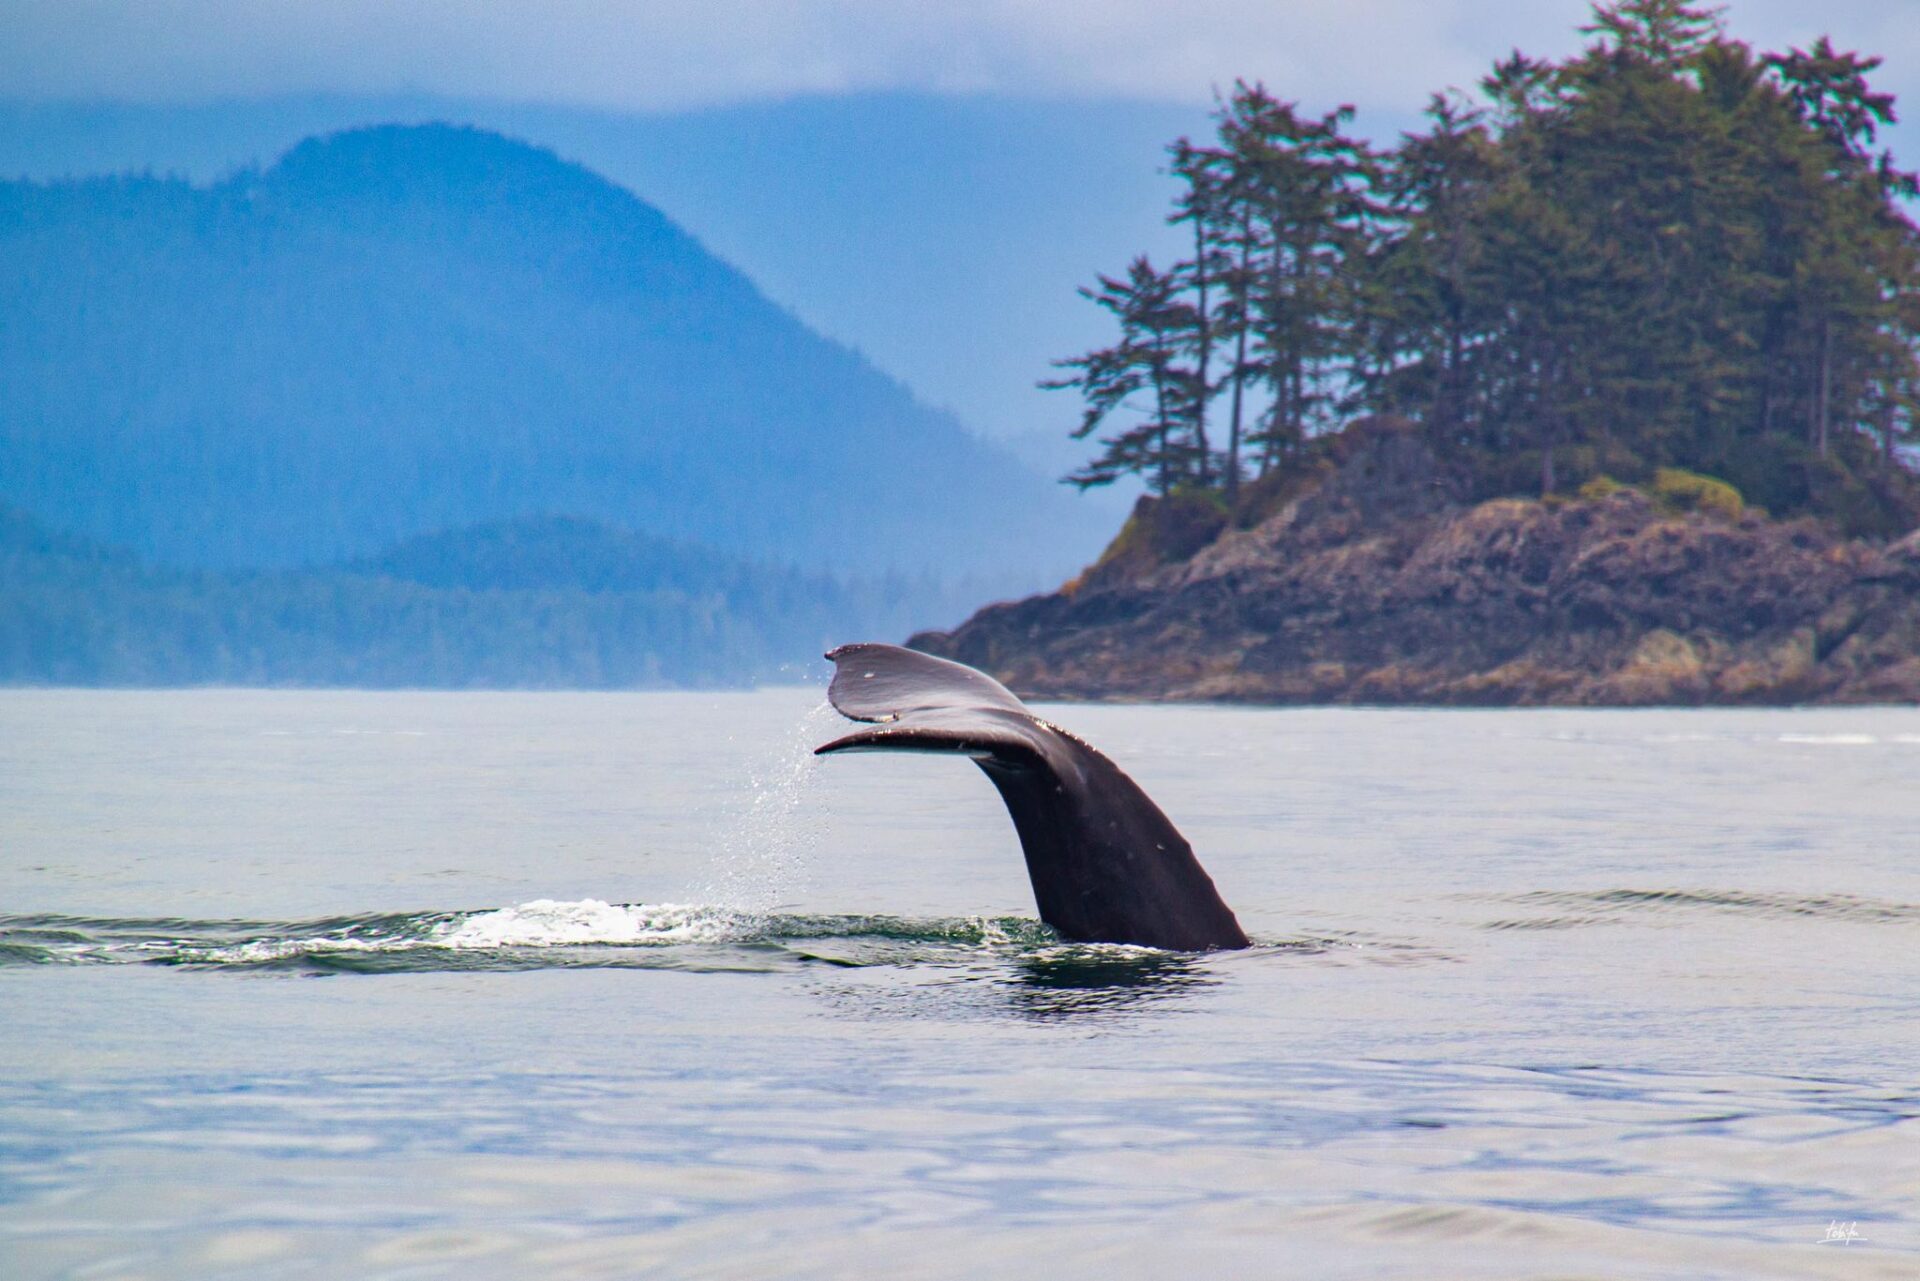 Tofino Vancouver Island whale watching | walbeobachtung in tofino bc